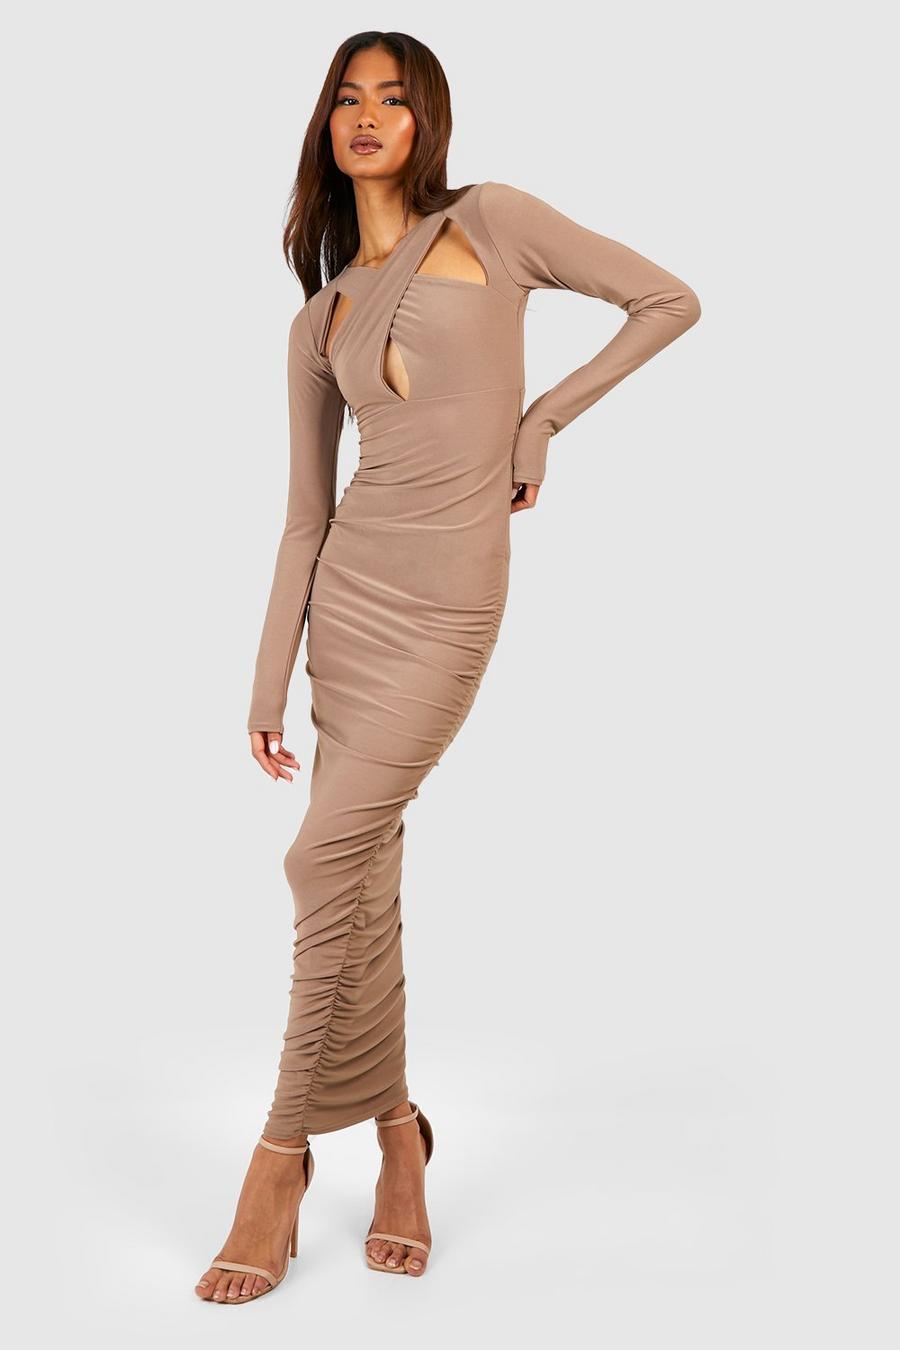 Mocha Tall Premium Soft Touch Keyhole Ruched Side Midaxi Dress